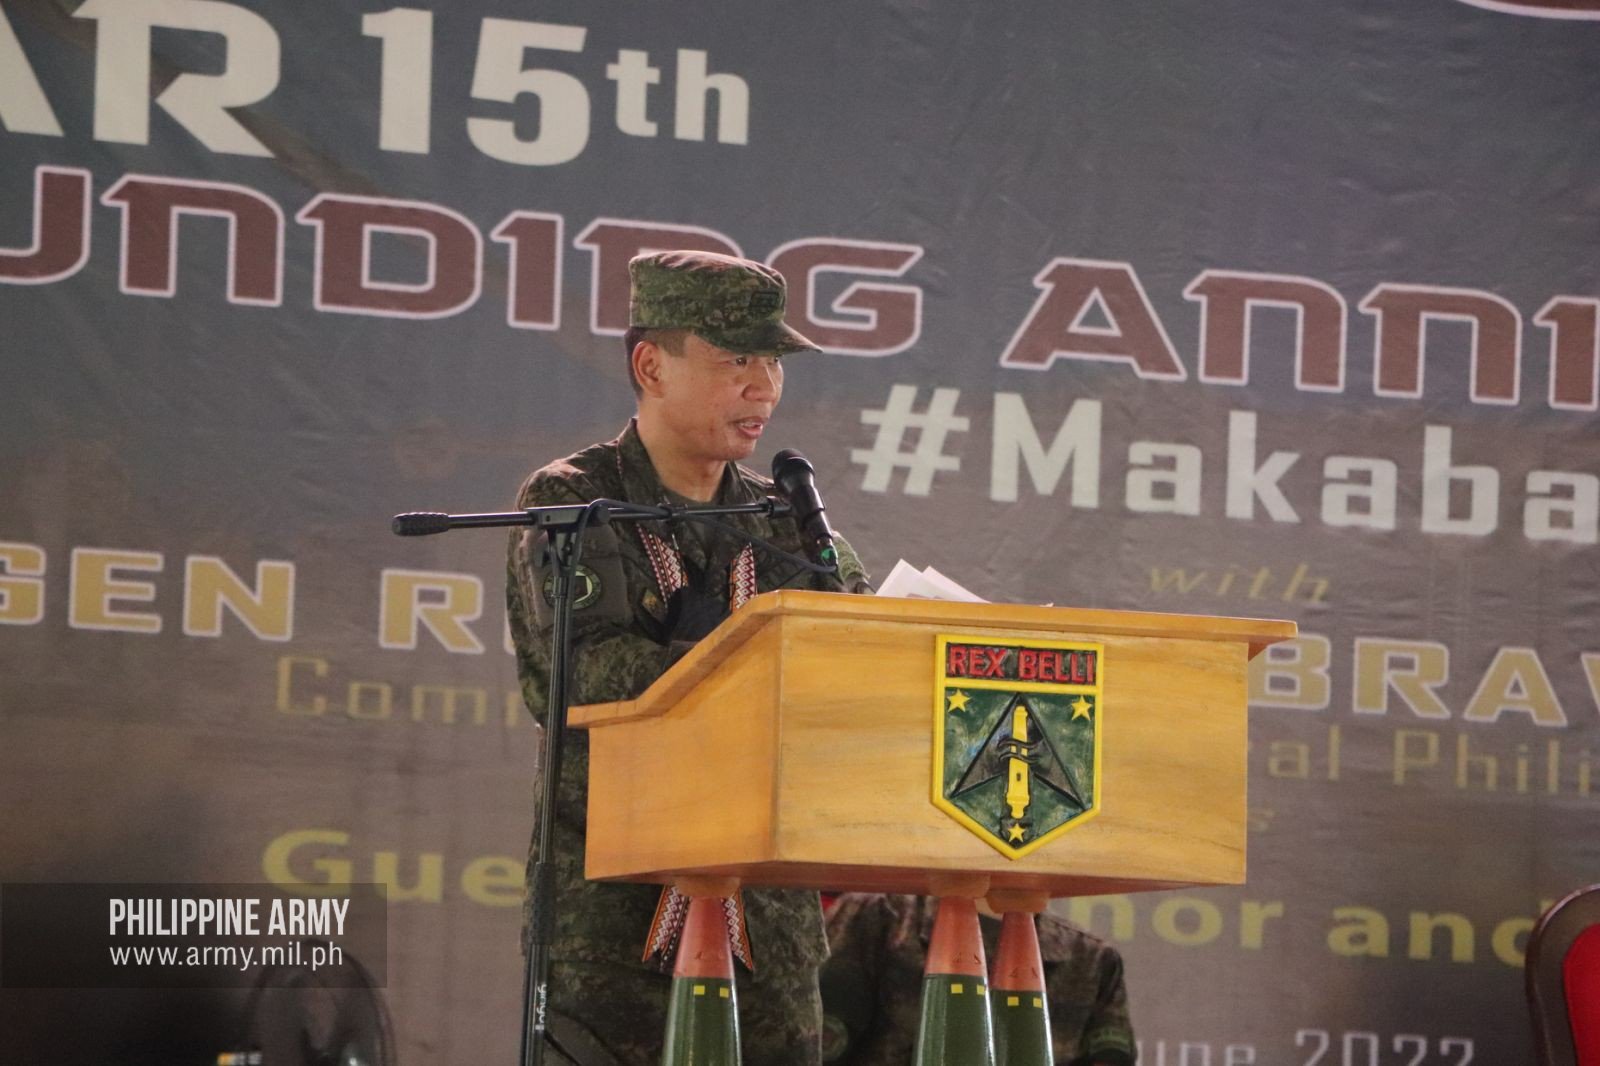 King of Battle marks 15th founding anniversary